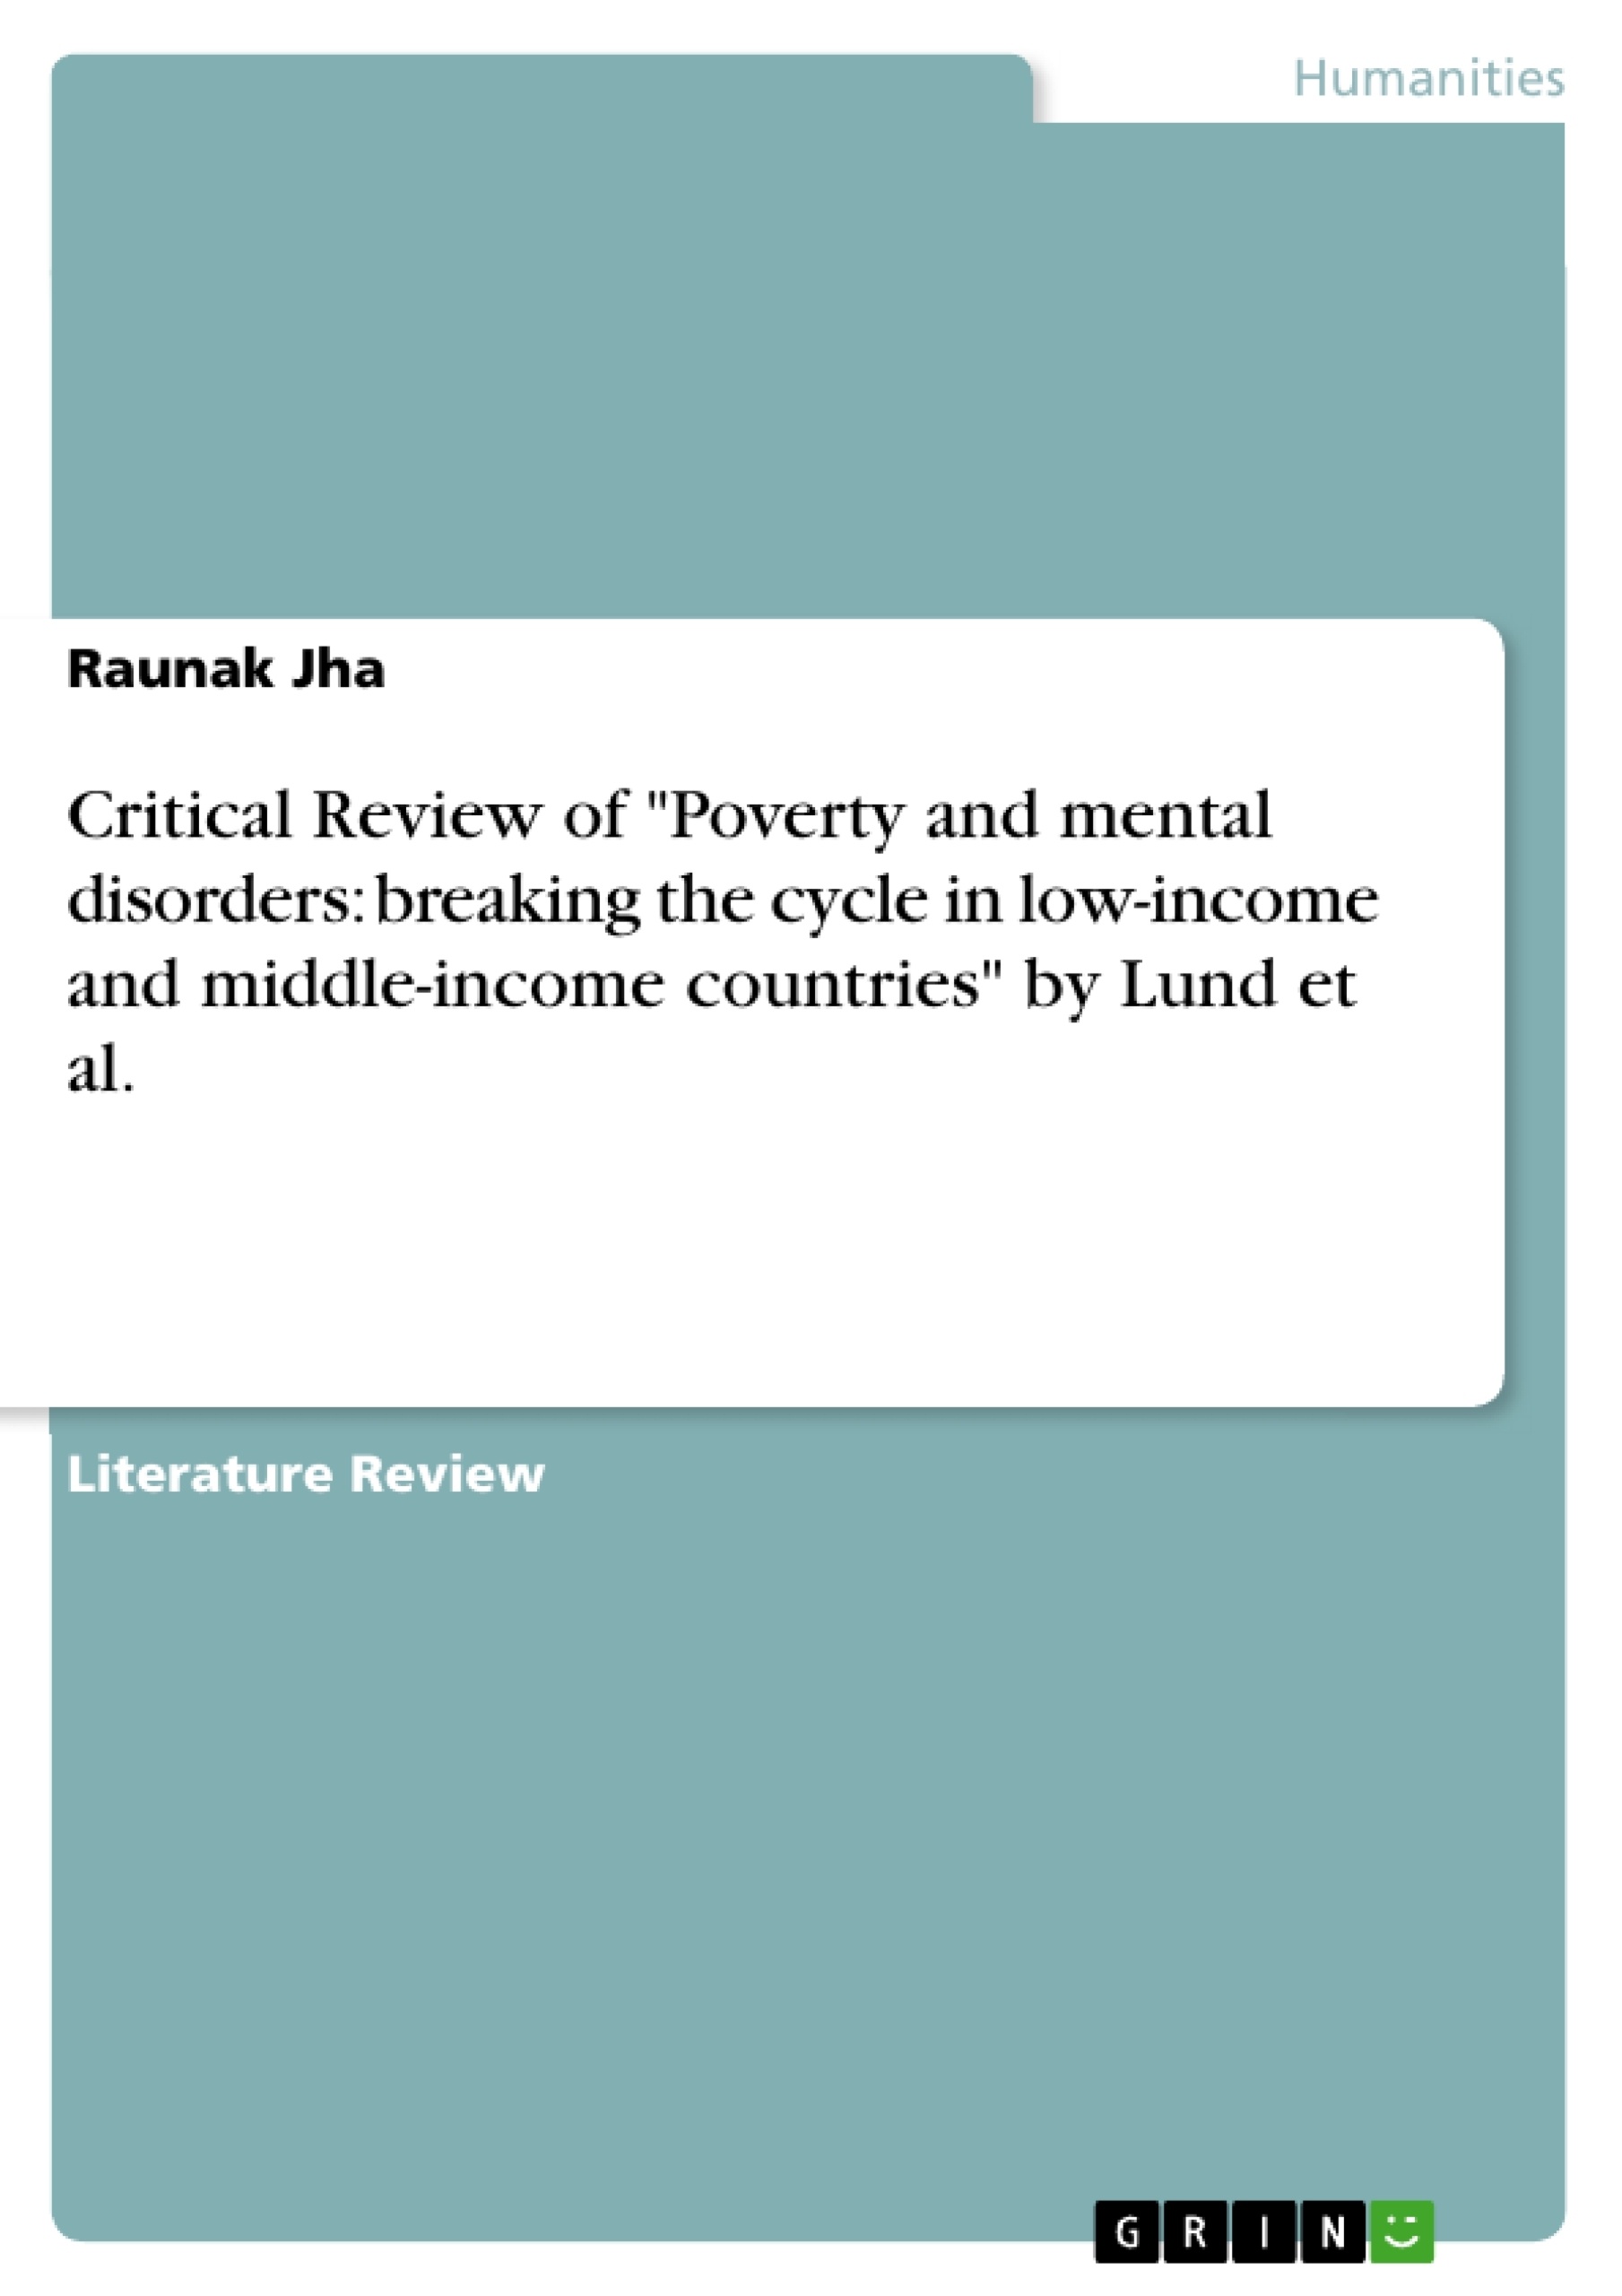 Title: Critical Review of "Poverty and mental disorders: breaking the cycle in low-income and middle-income countries" by Lund et al.